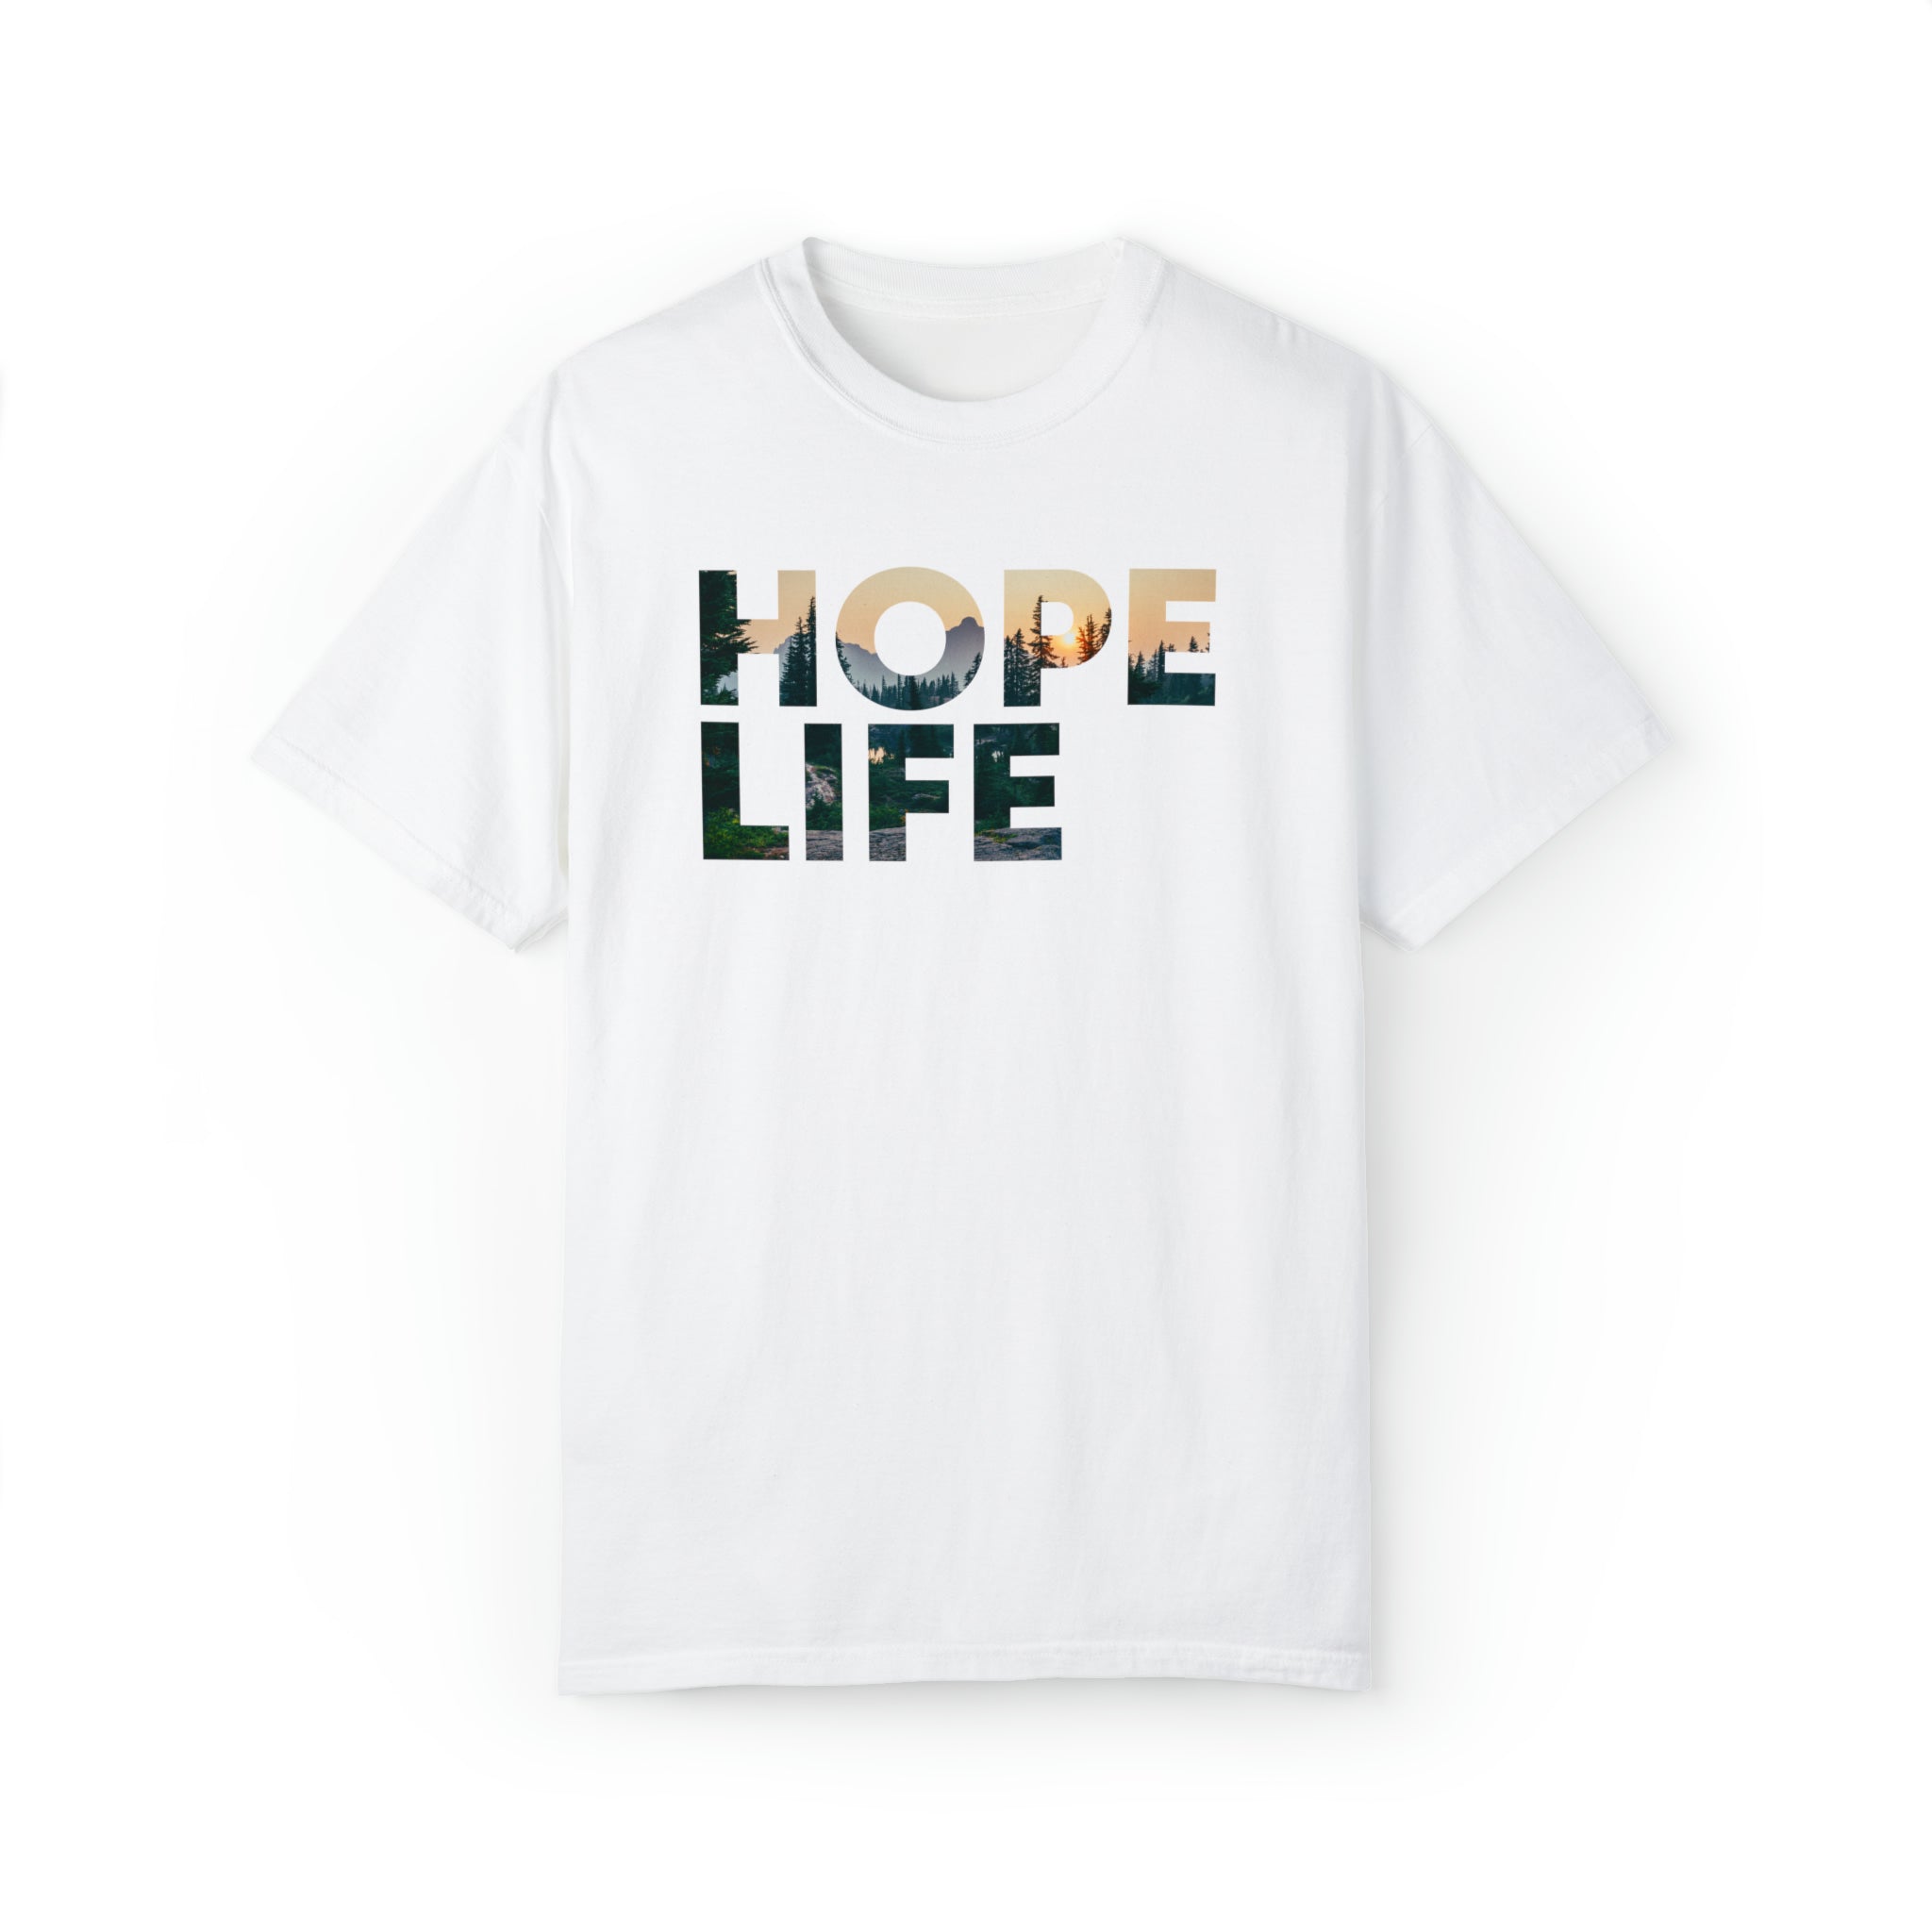 Forest Life Tee